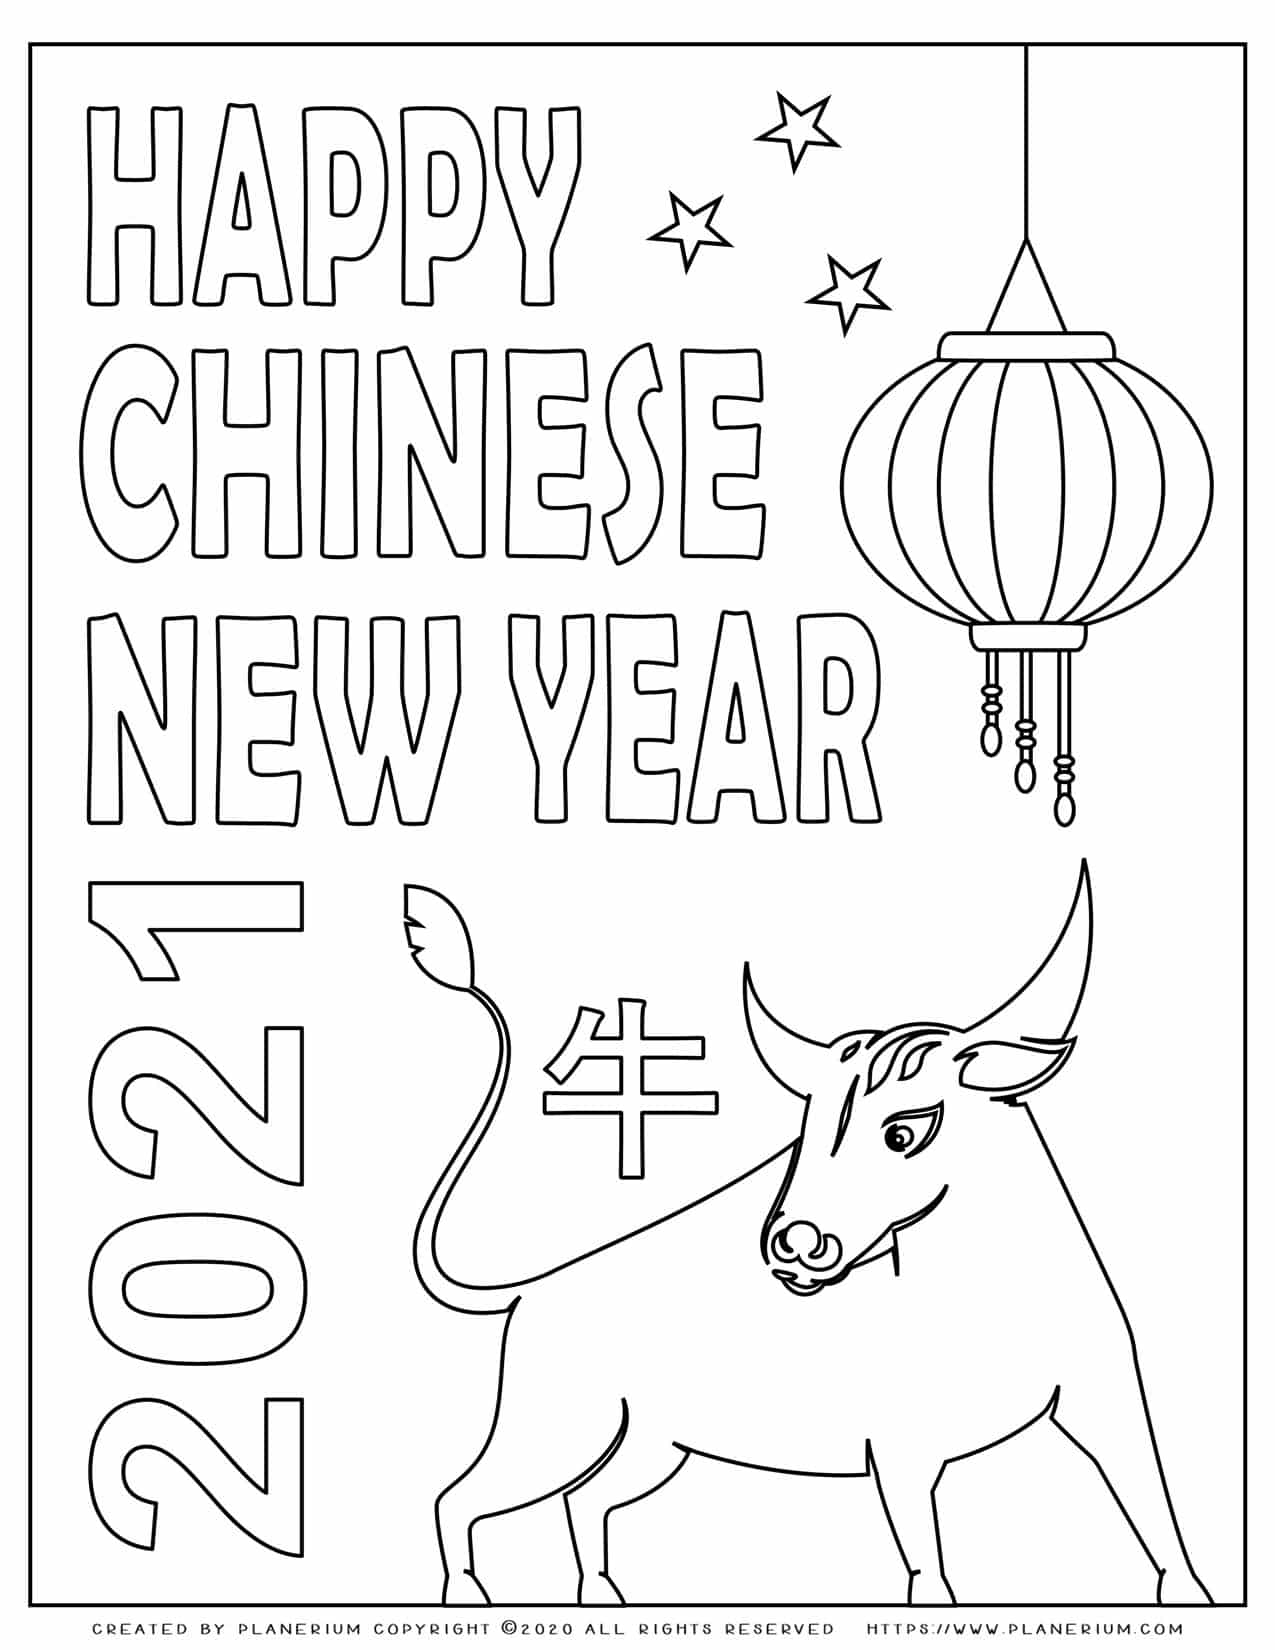 Chinese new Year 2021 - Year of the Ox - Coloring Page - Decorated Poster | Planerium